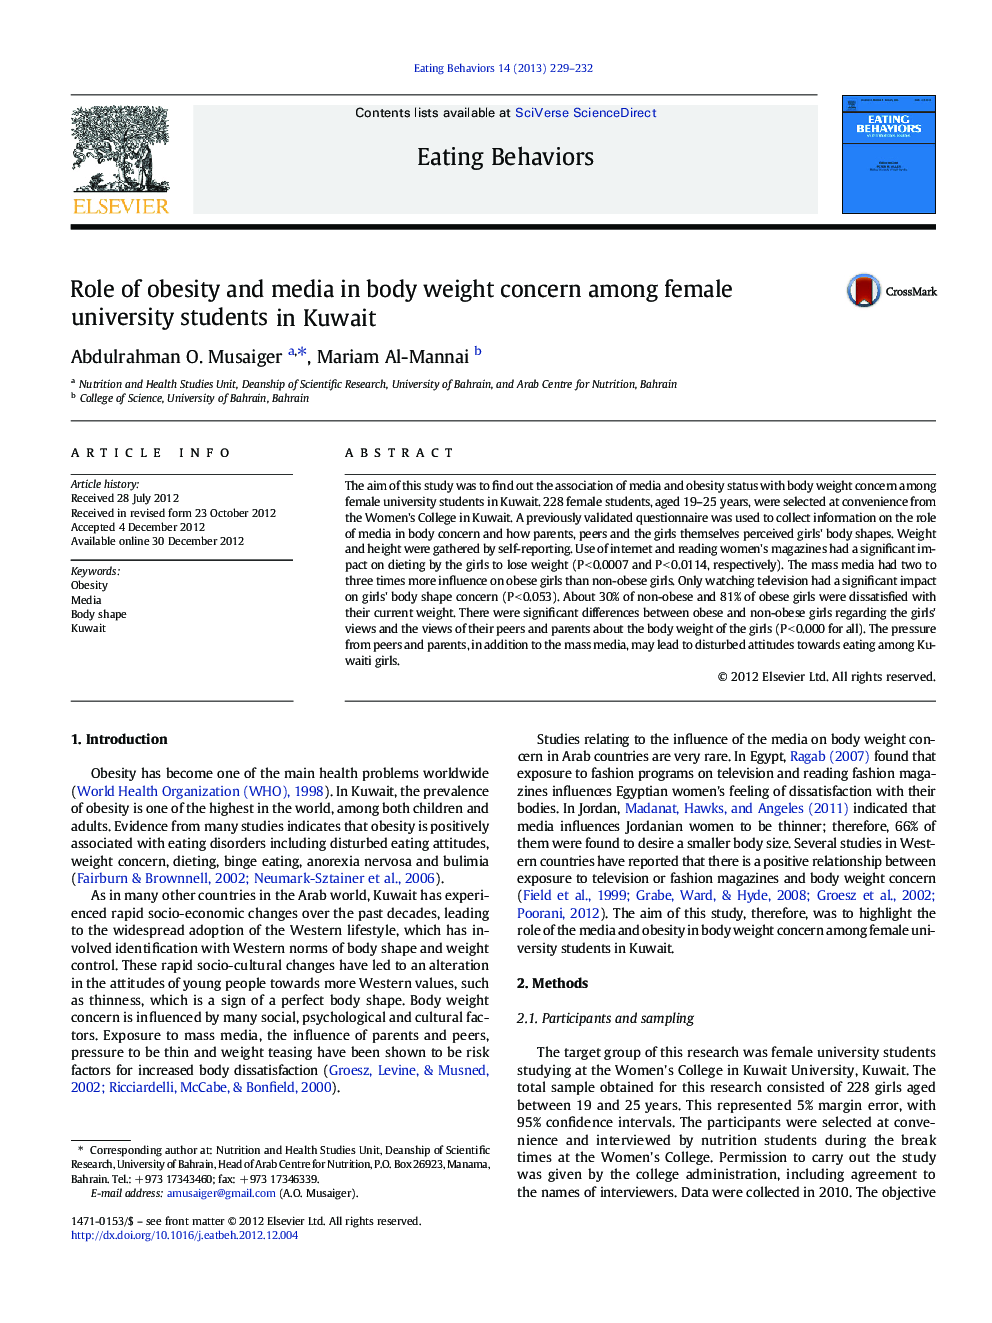 Role of obesity and media in body weight concern among female university students in Kuwait